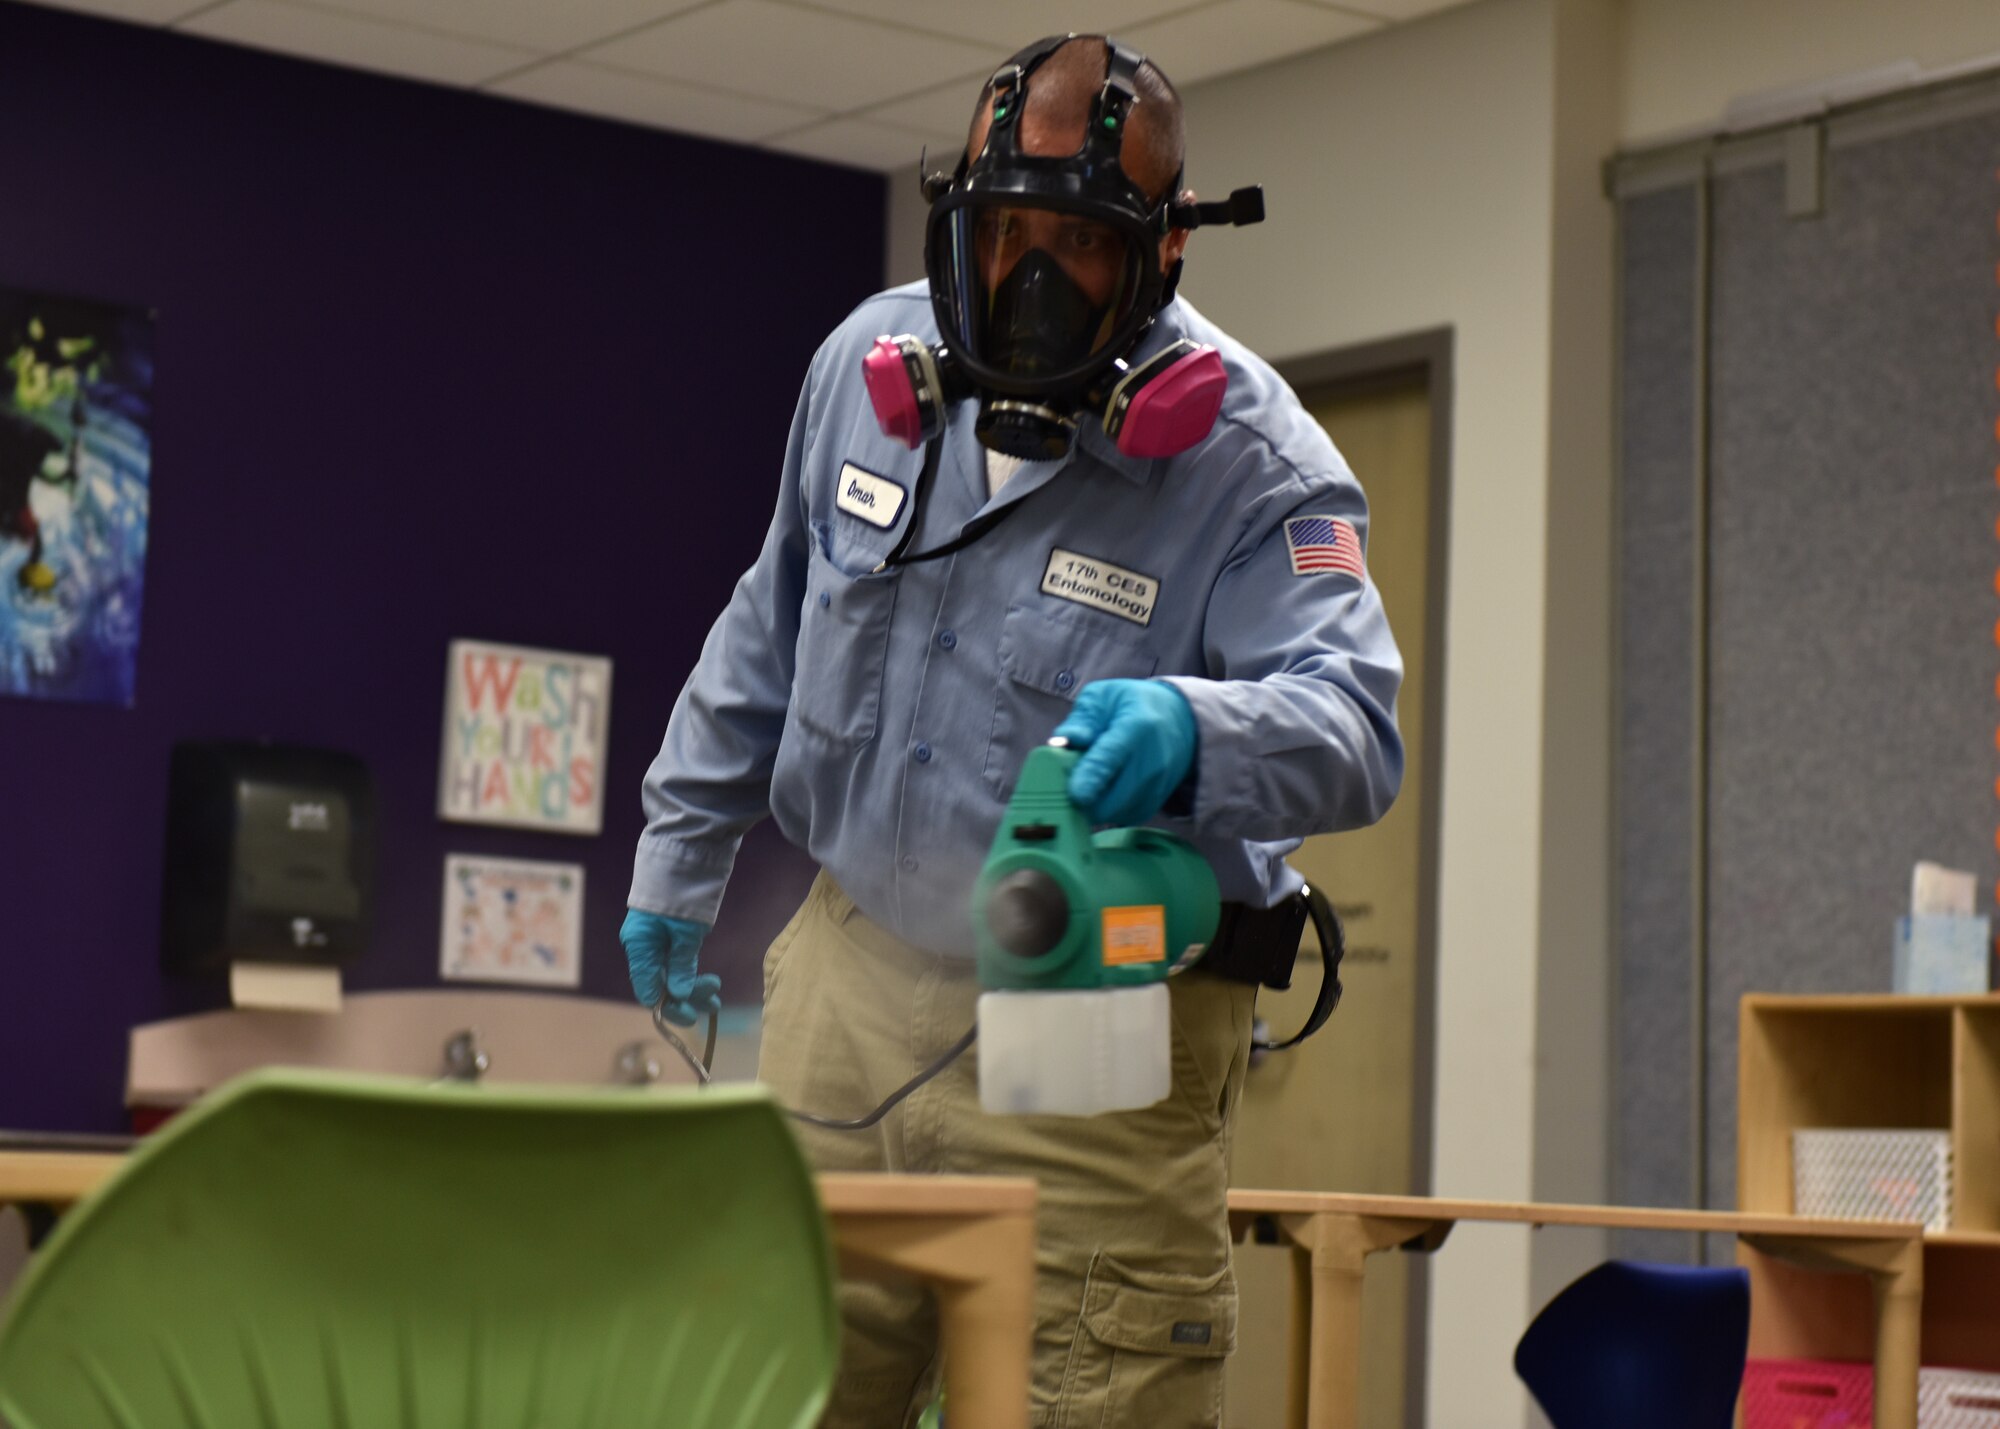 17th Civil Engineer Squadron Pest Controller Omar Martinez, walks around a classroom dispersing a disinfectant mist on all surfaces at Goodfellow Air Force Base, Texas, March 30, 2020. The chemical used is 99 percent effective at bonding to germs on the surface and killing them within the dwell time of 20 minutes. (U.S. Air Force photo by Senior Airman Seraiah Wolf)